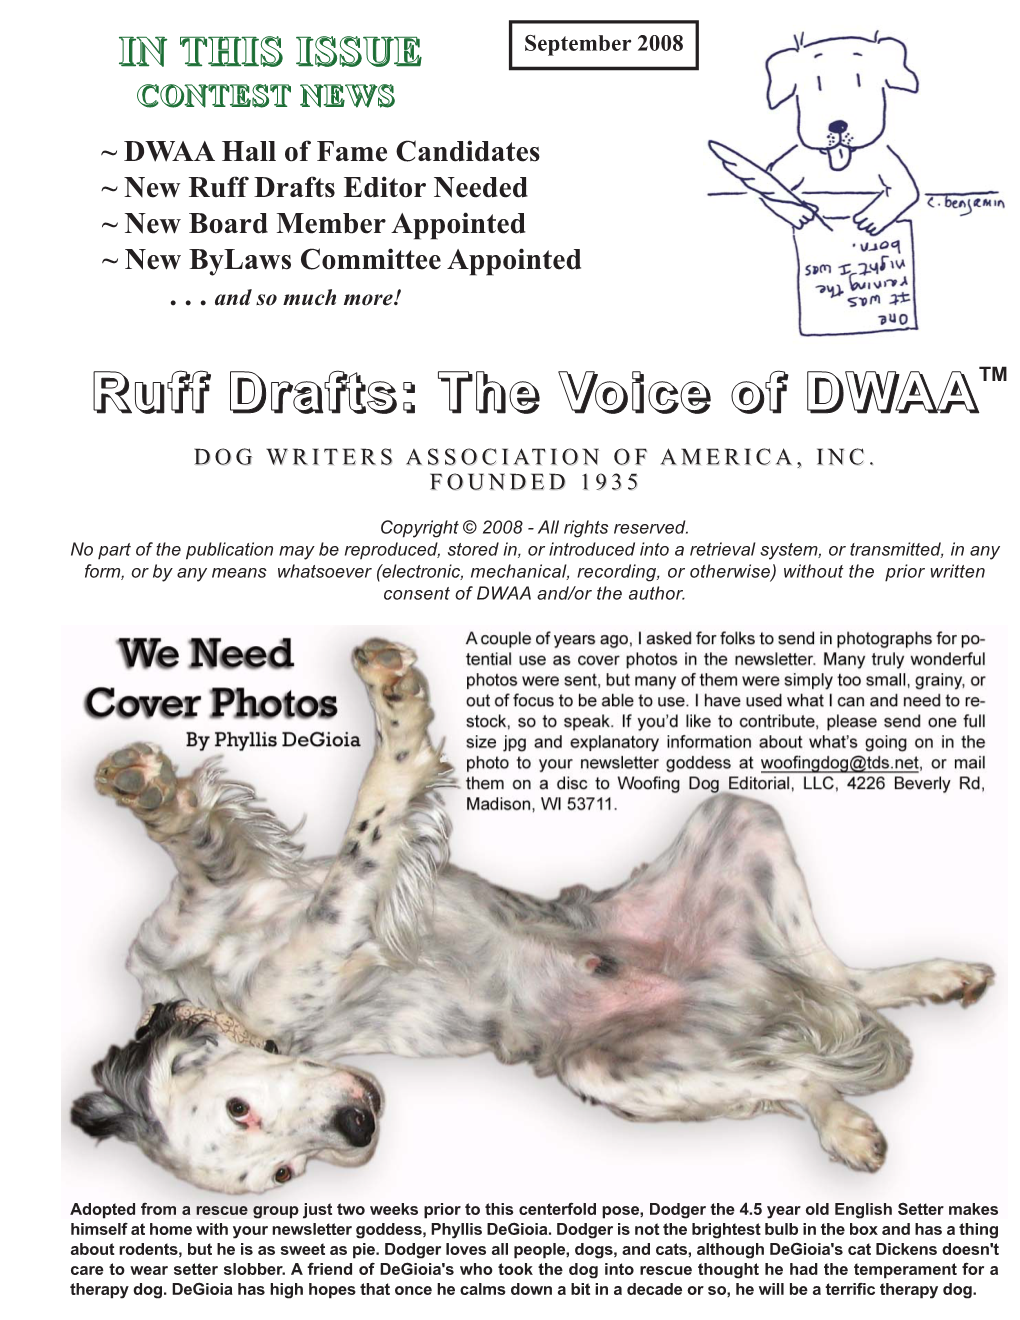 September 2008 CCOONNTTEESSTT NNEEWWSS ~ DWAA Hall of Fame Candidates ~ New Ruff Drafts Editor Needed ~ New Board Member Appointed ~ New Bylaws Committee Appointed